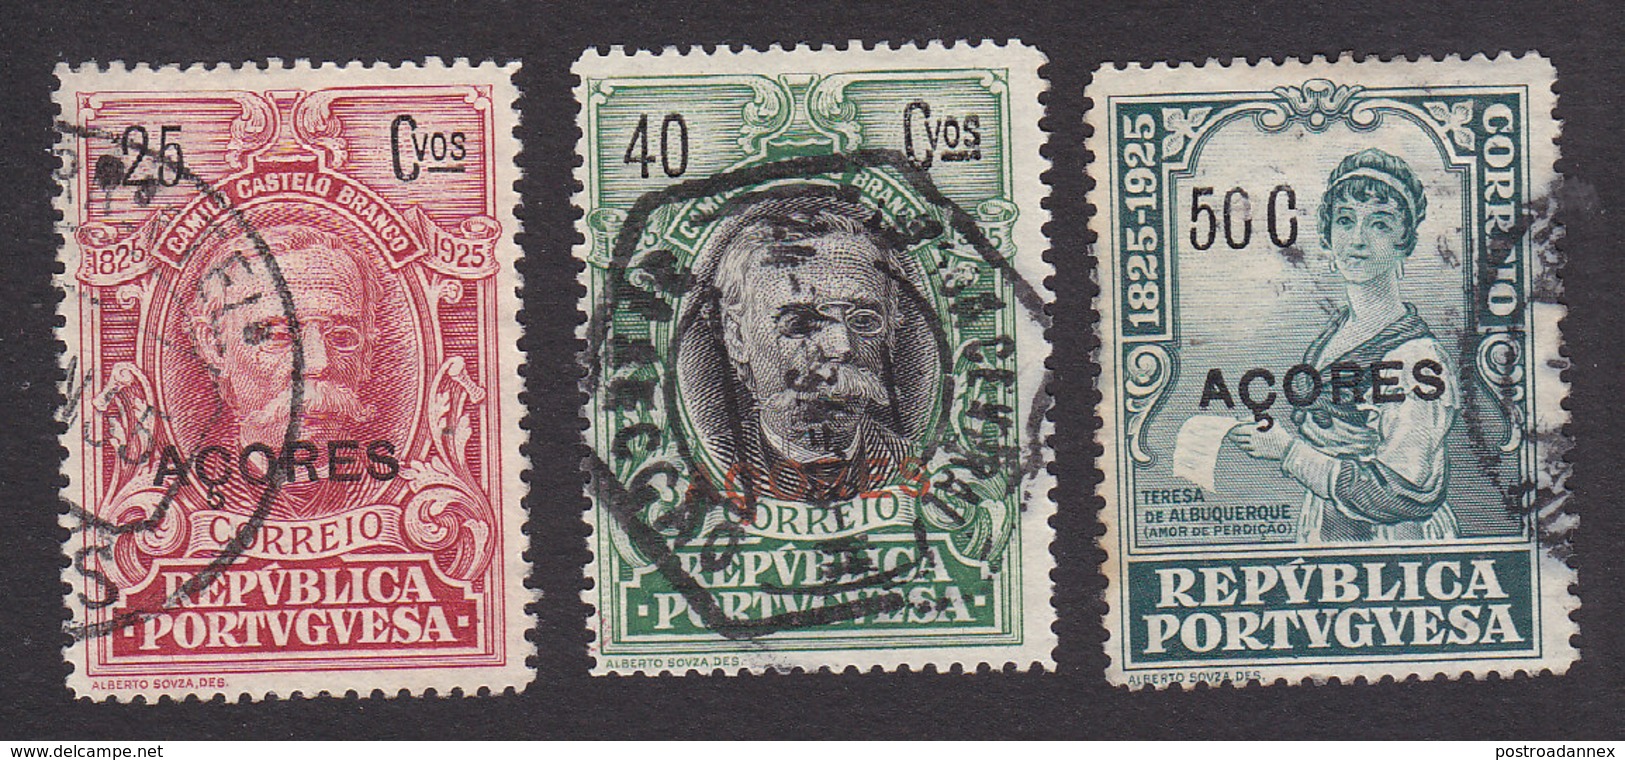 Azores, Scott #244, 246, 248, Used, Centenary Of Birth Of Castello-Branco Overprinted, Issued 1925 - Azores